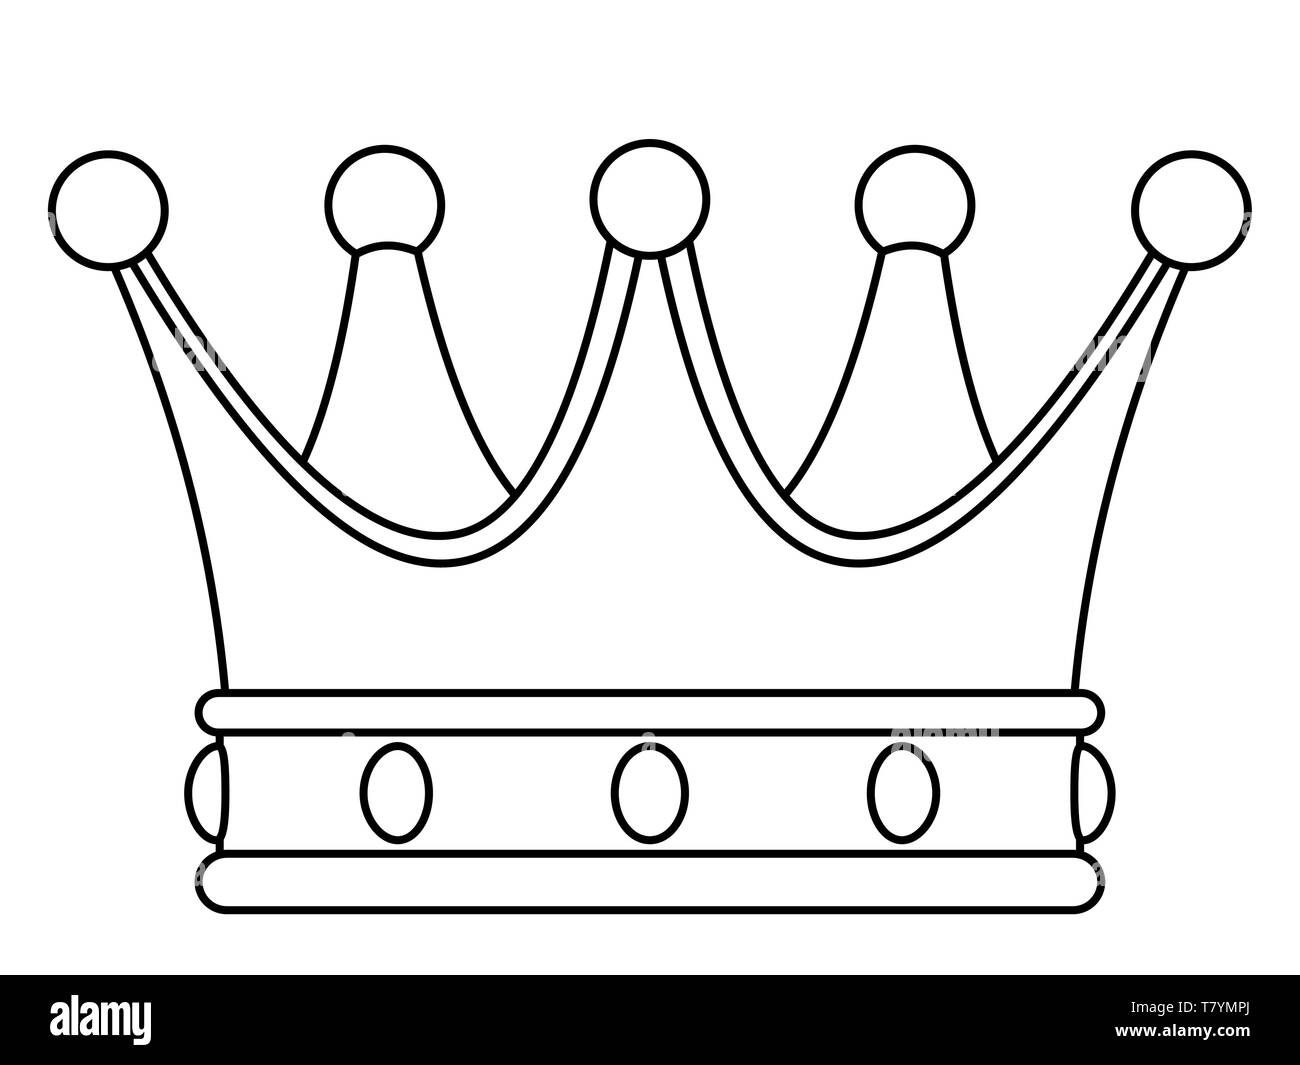 Illustration of the contour royal crown icon Stock Vector